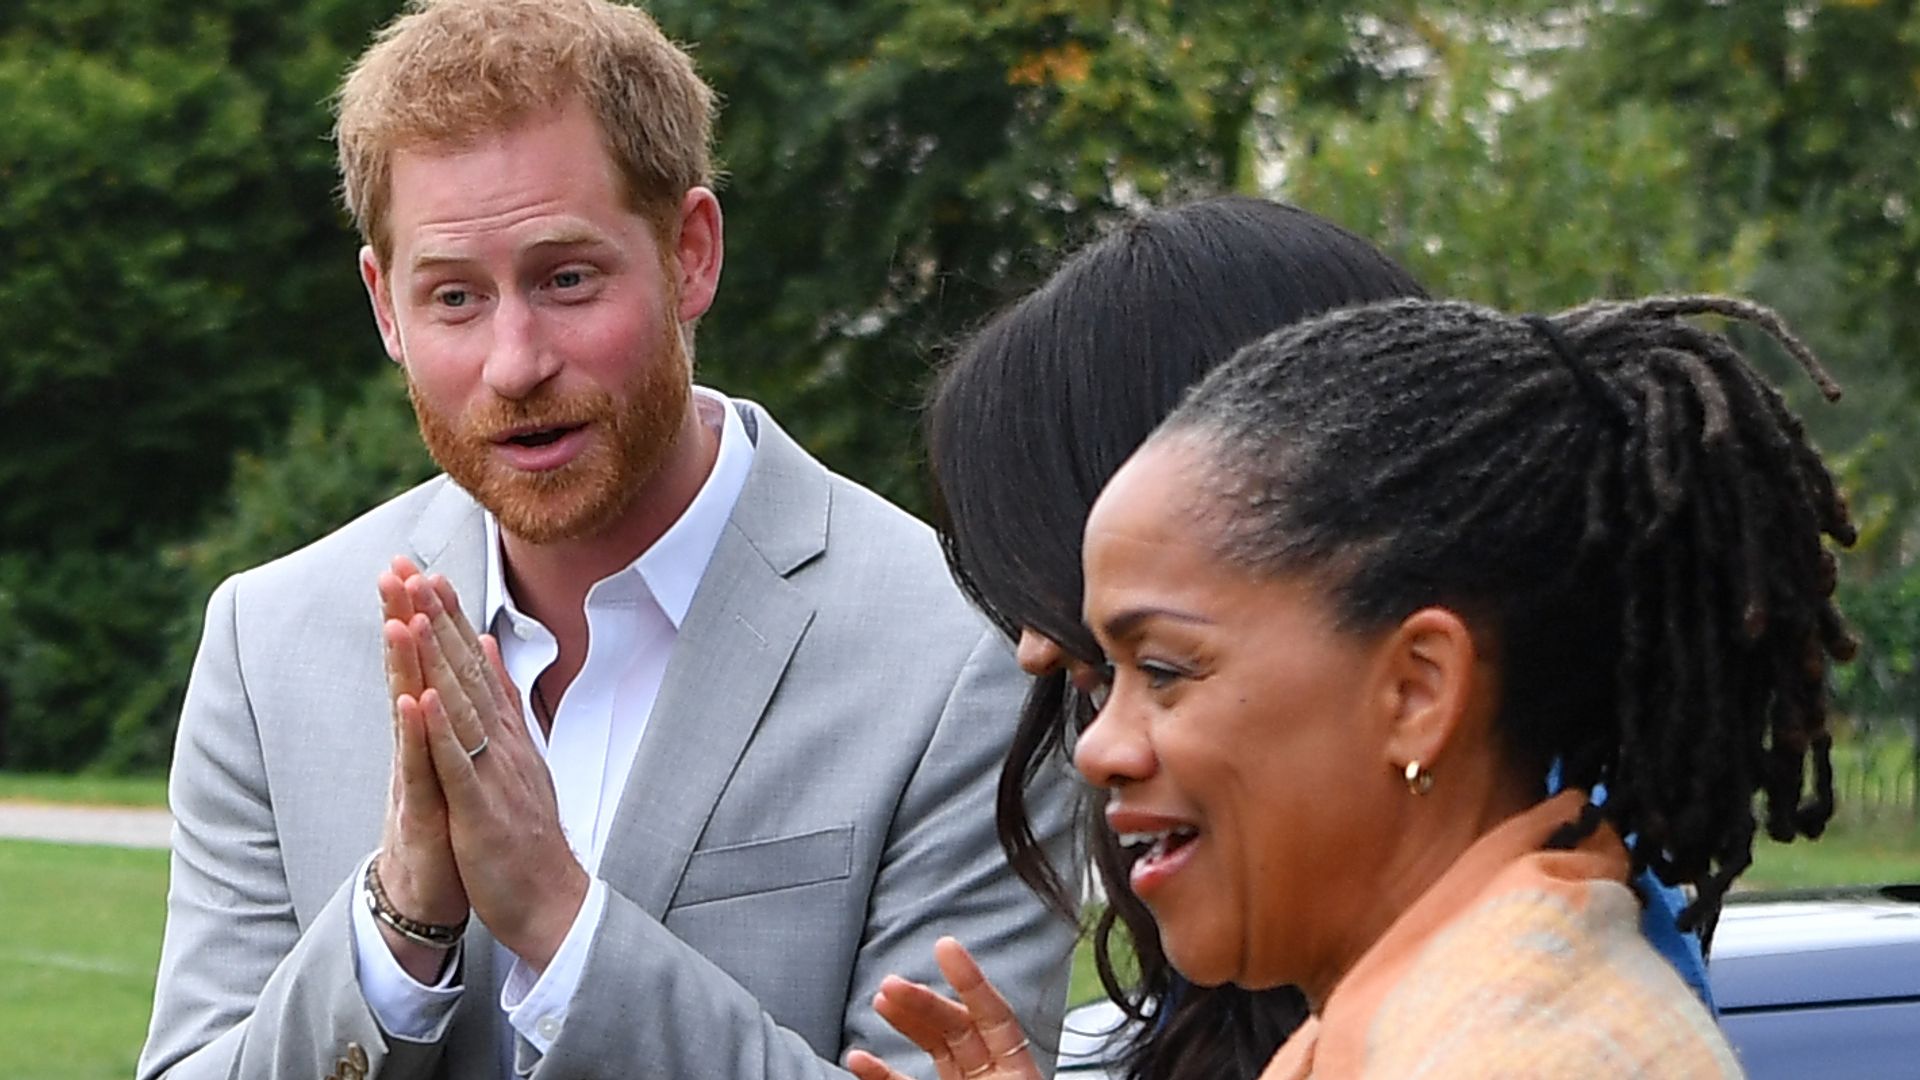 Prince Harry, Meghan Markle and her mother Doria Ragland standing outside smiling and talking